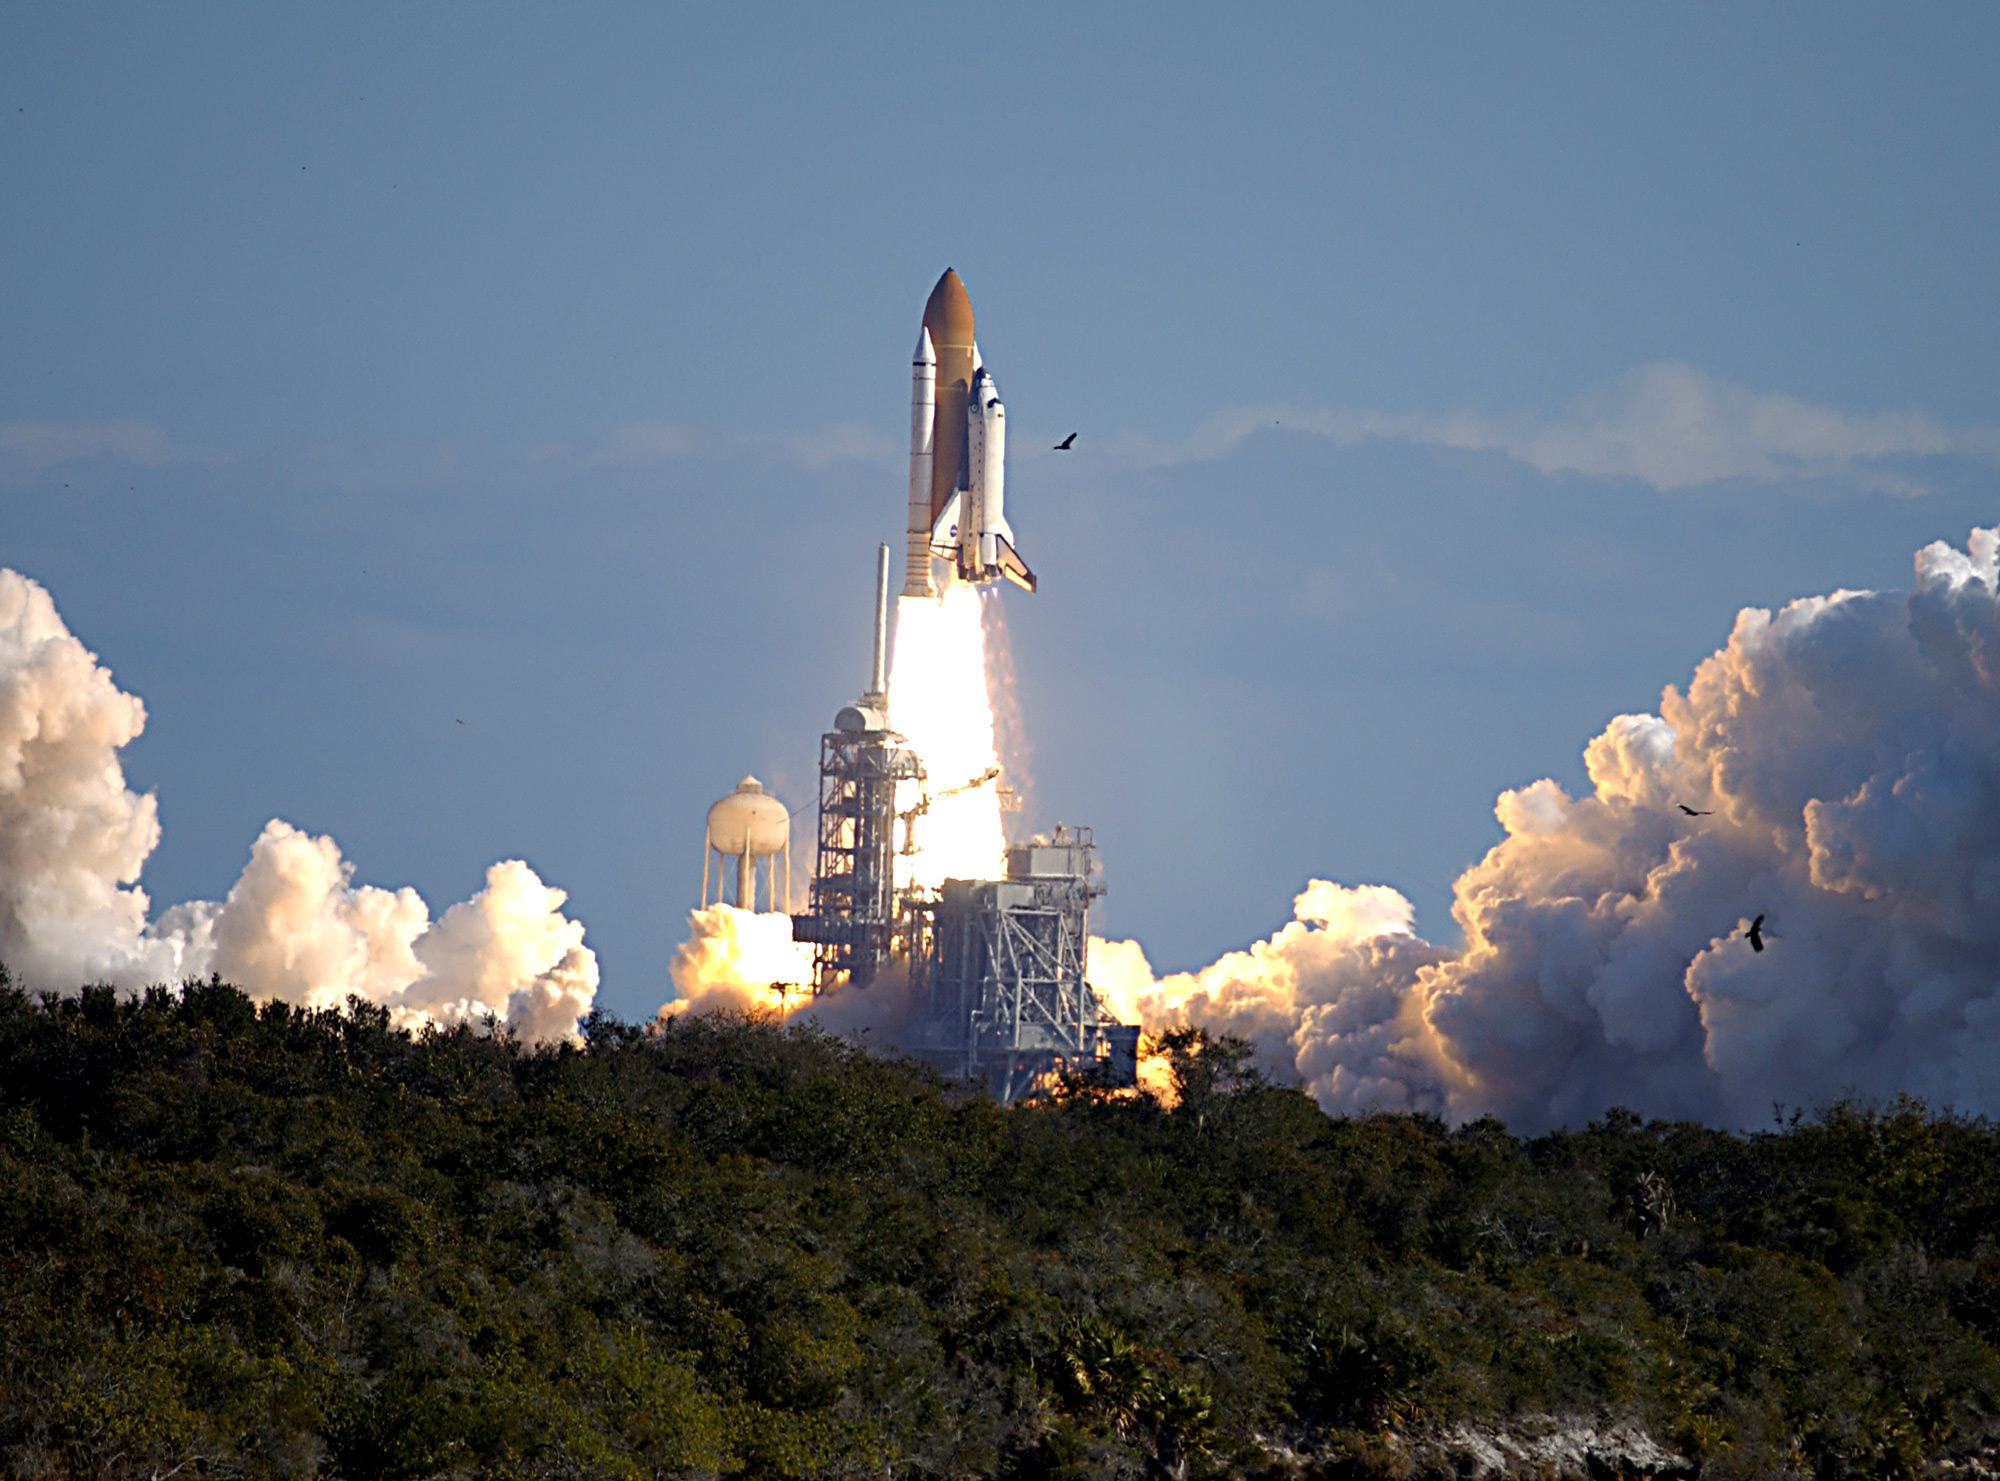 Space Shuttle Columbia (STS-107) lifts off from Launch Complex 39A at Kennedy Space Center, 15:39:00 UTC, 16 January 2003. (NASA)